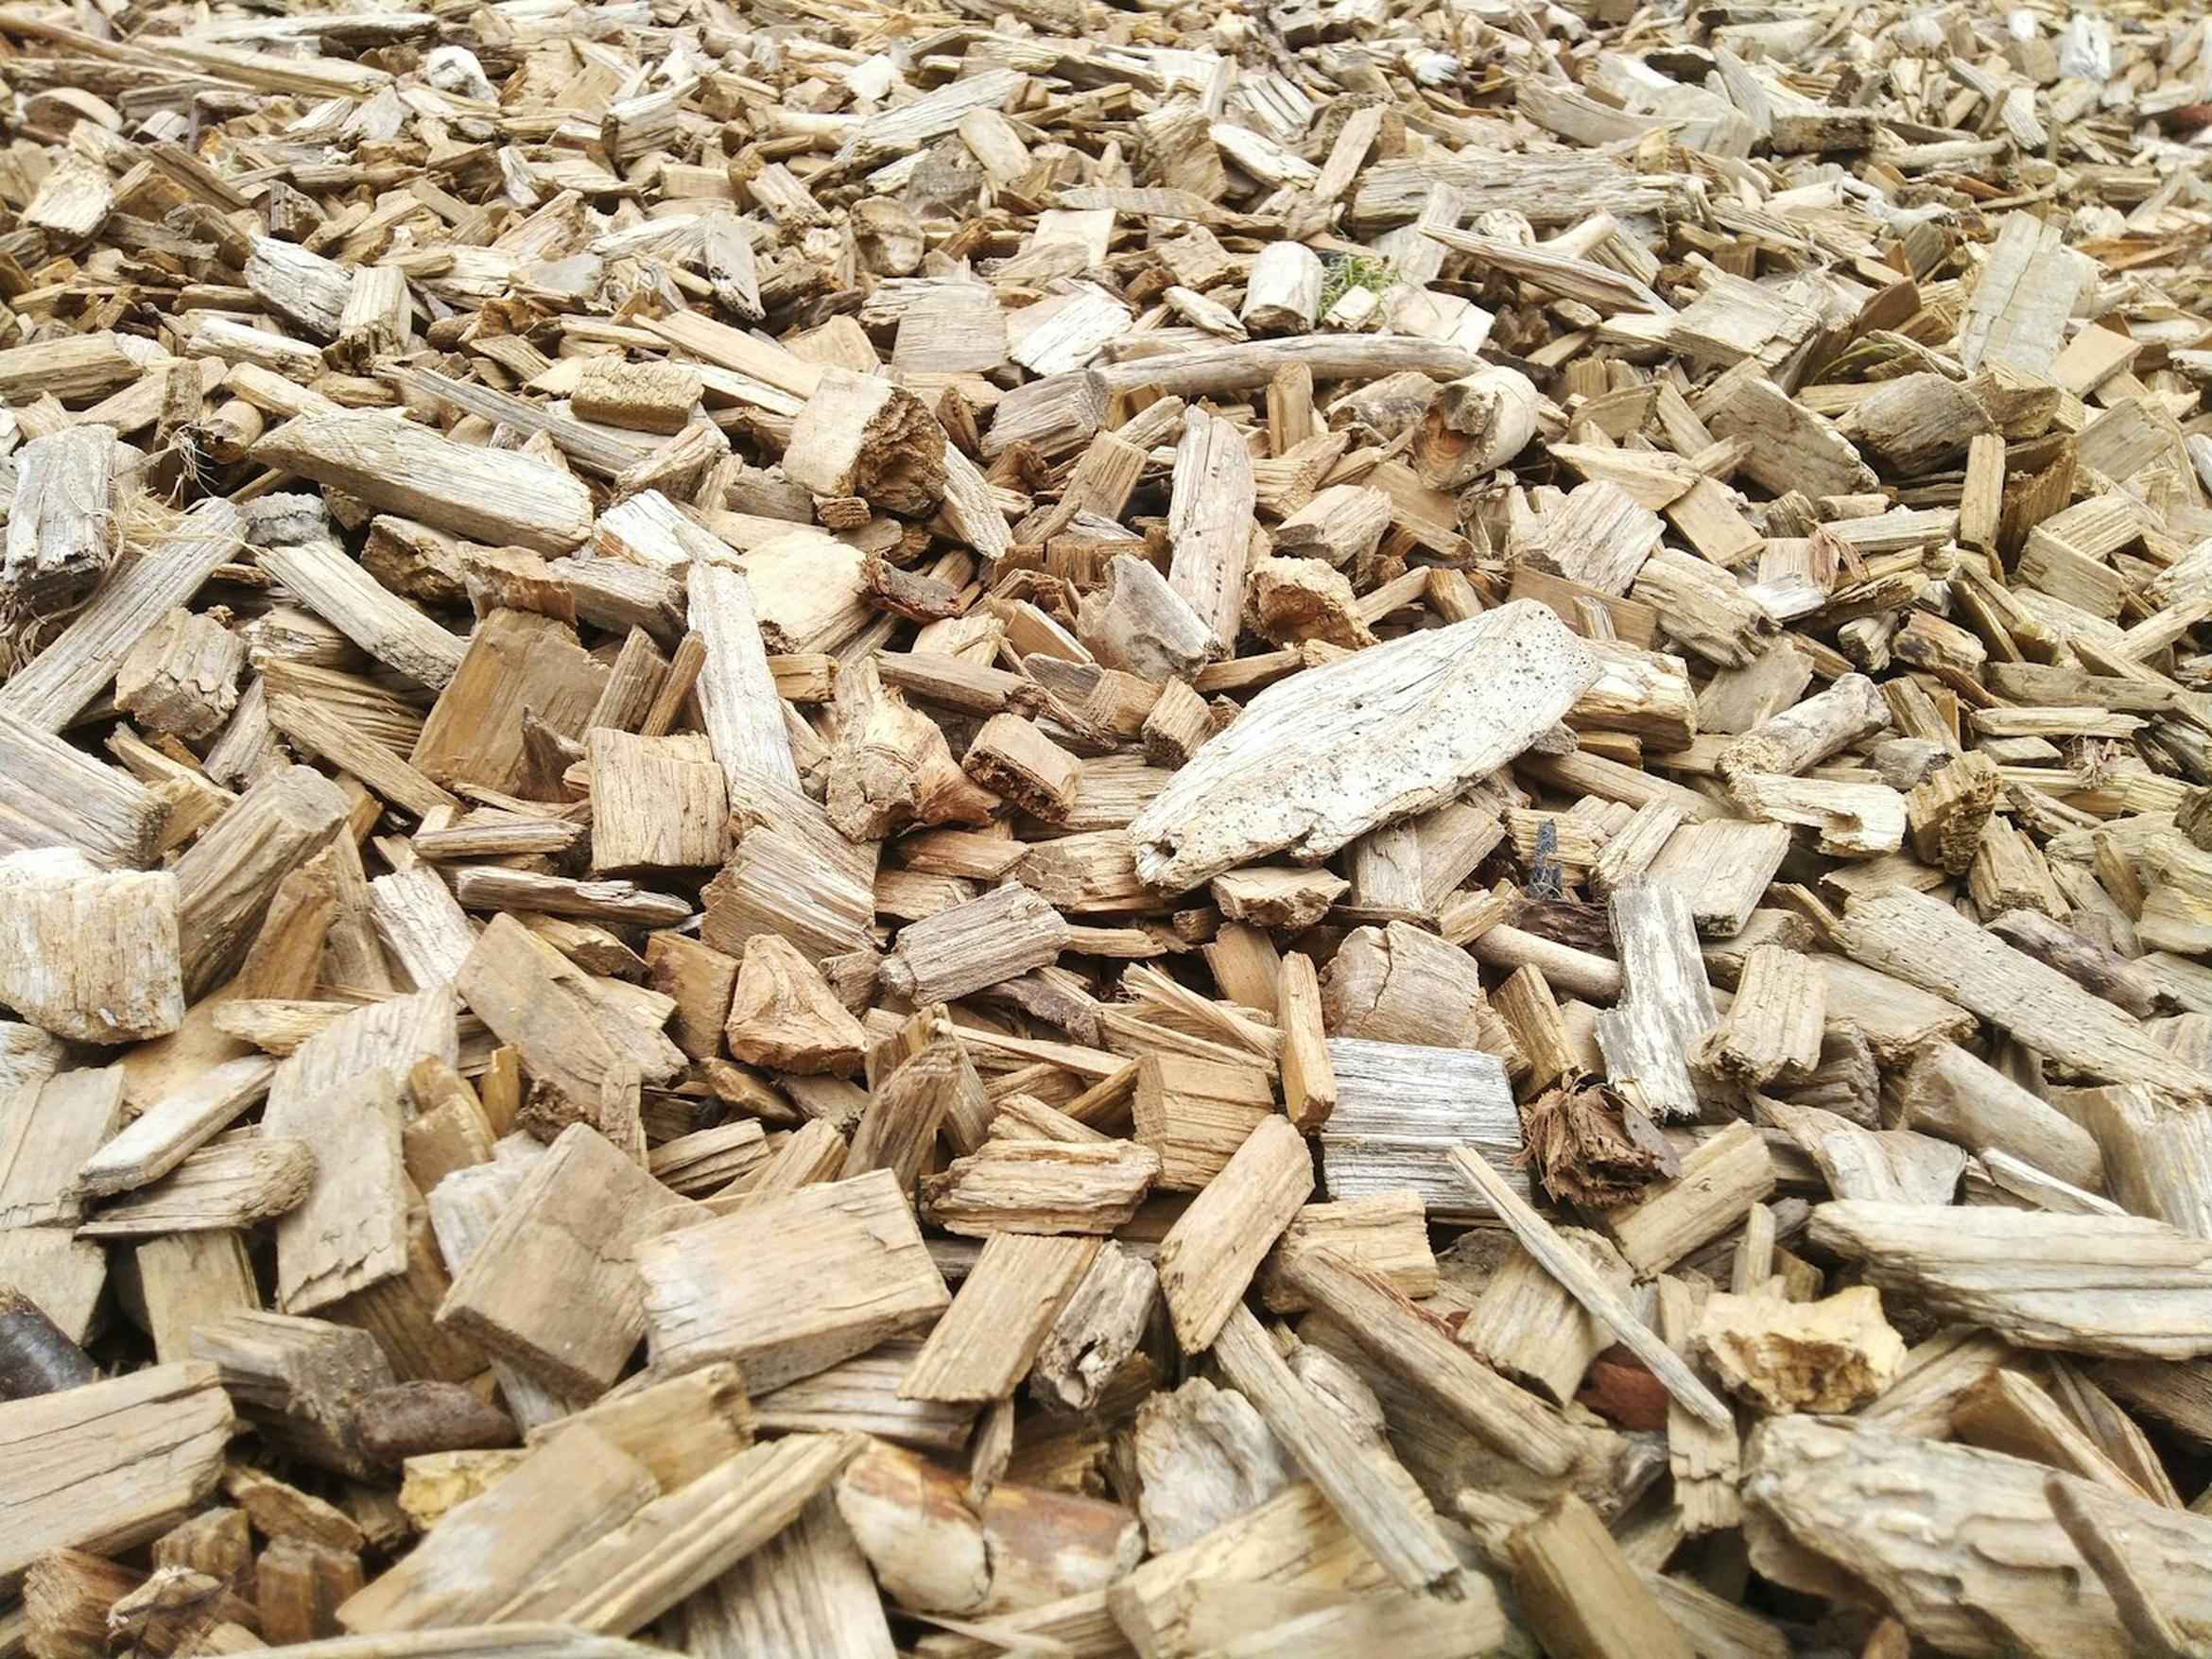 Wood chippings Surrey